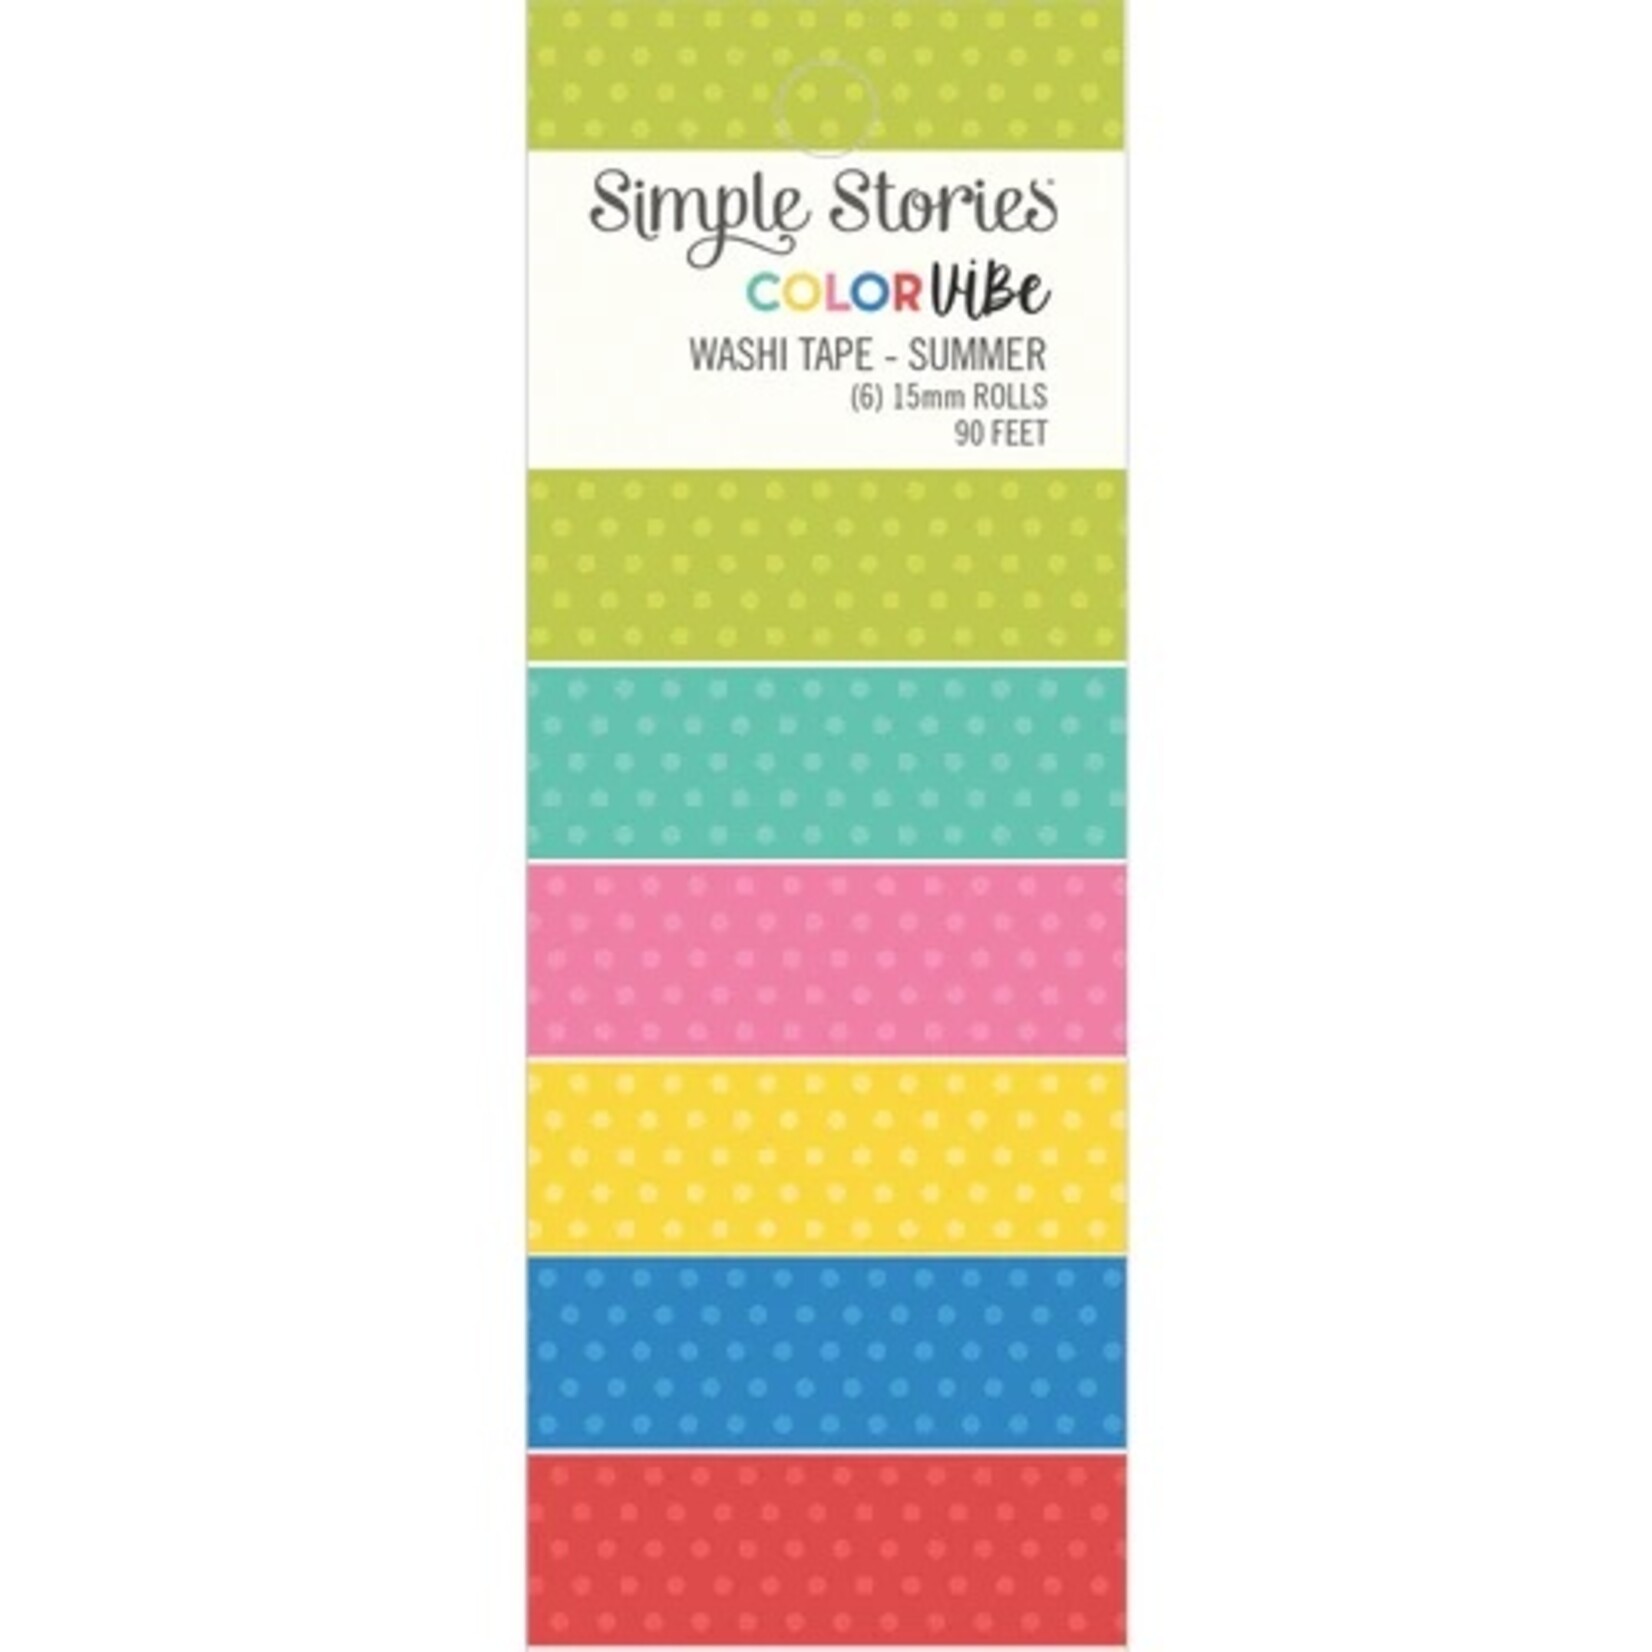 SIMPLE STORIES COLOR VIBE WASHI TAPE 15MMX9O' 6/PK SUMMER